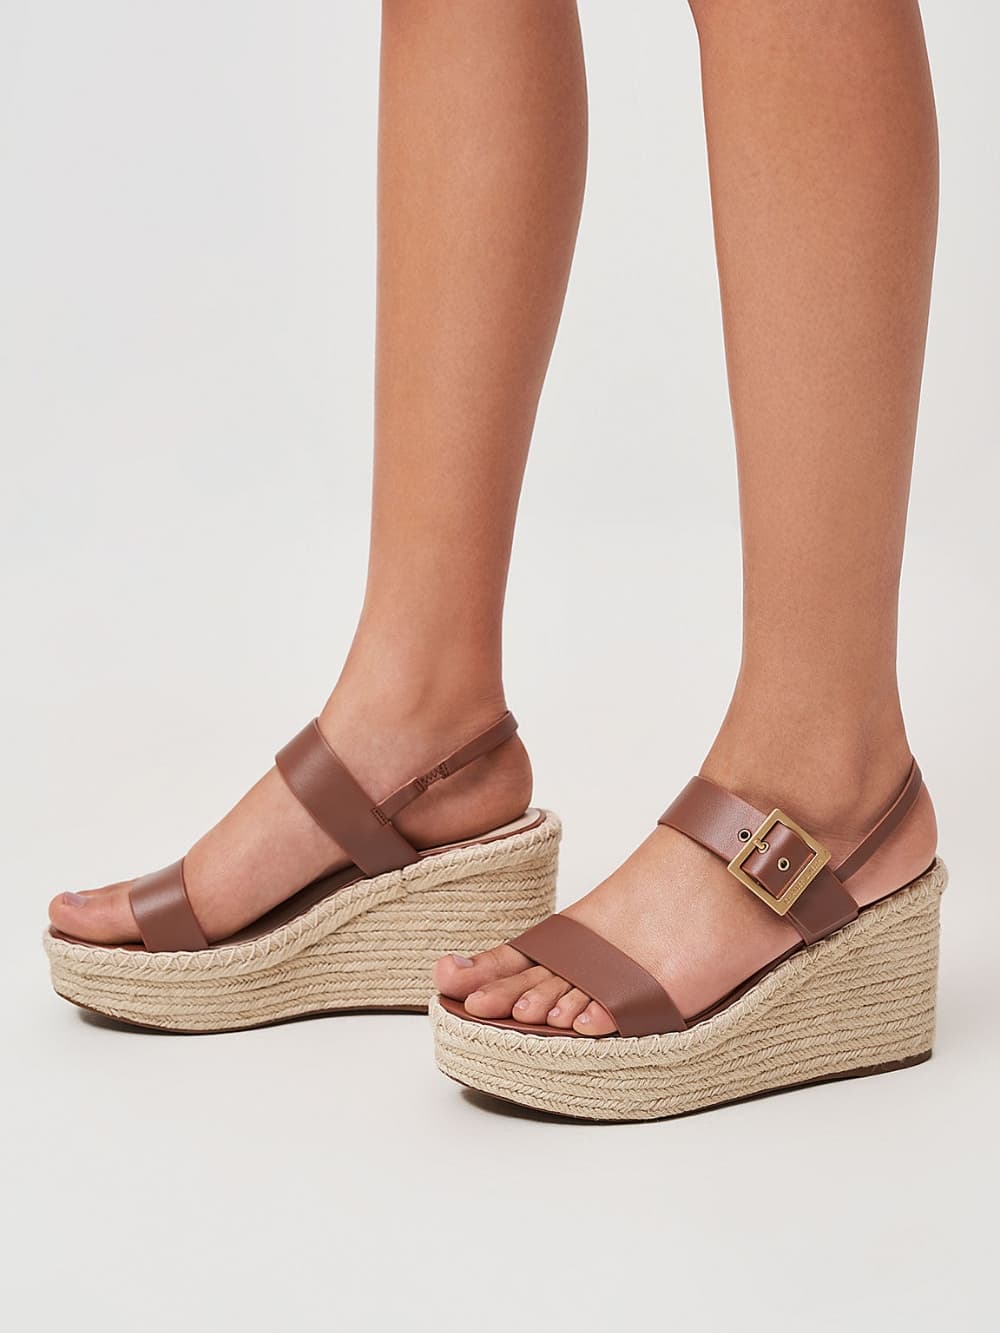 Women's brown buckled espadrille wedges - CHARLES & KEITH